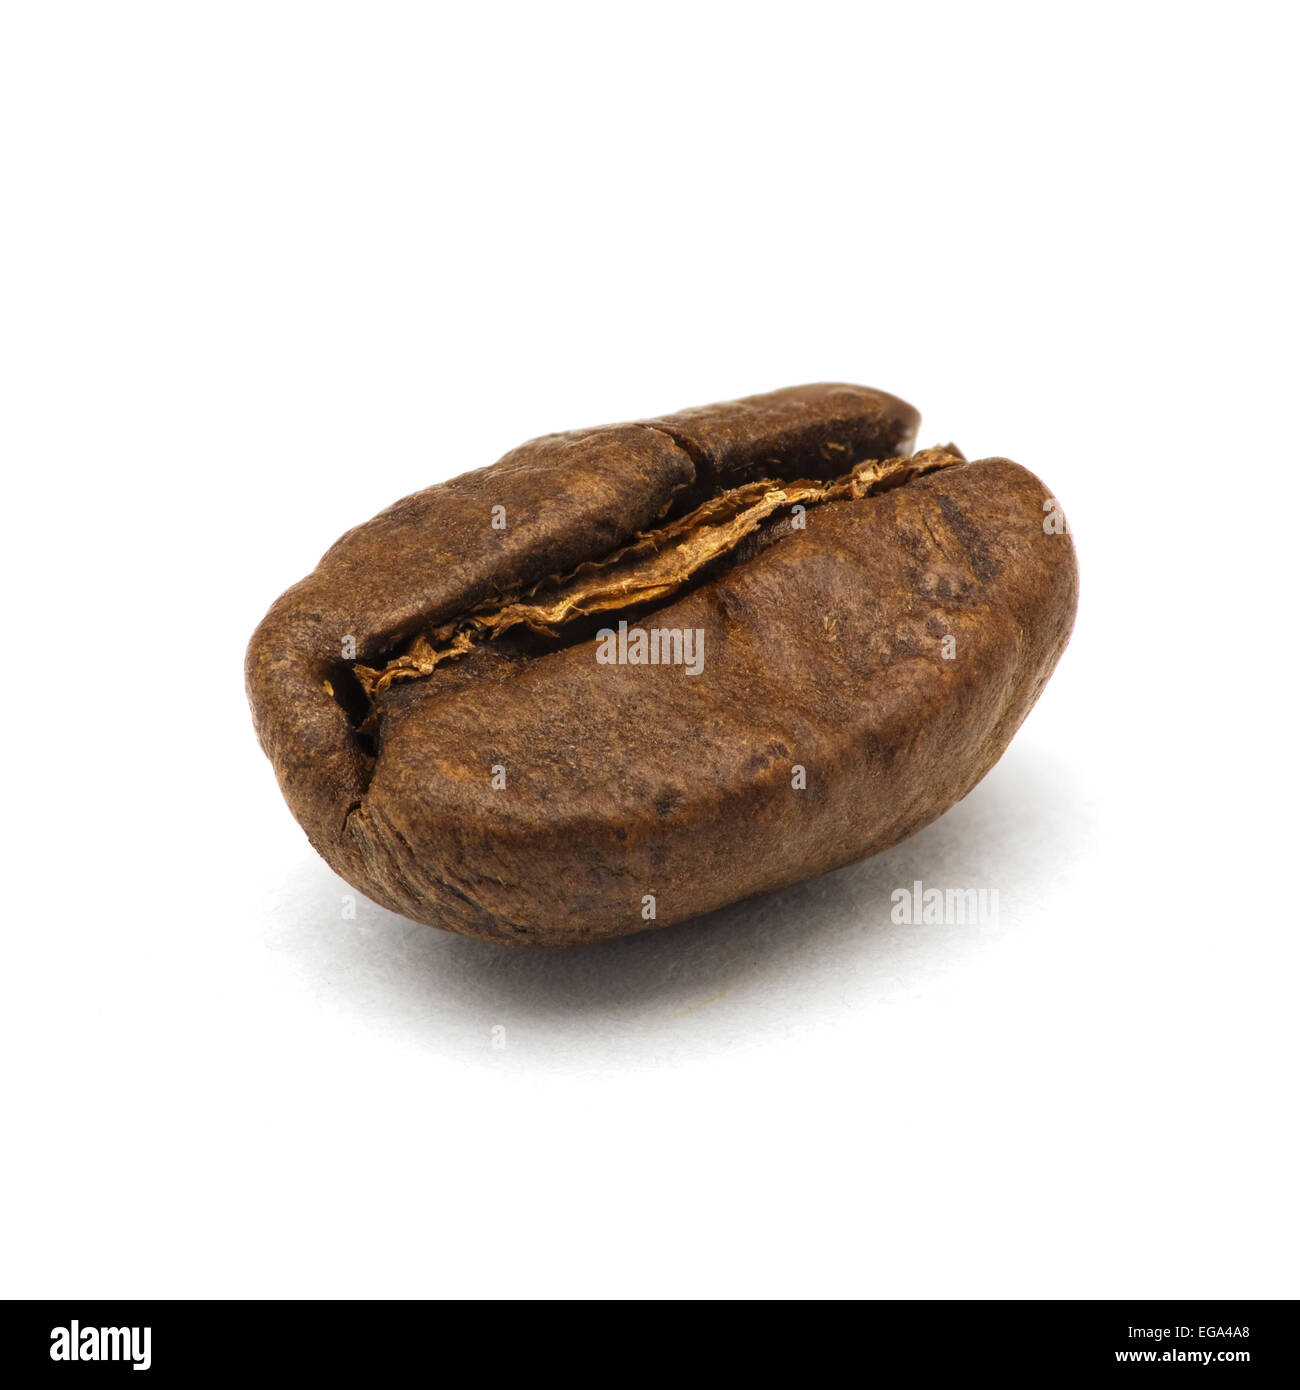 Roasted coffee bean macro shot with extended depth of field Stock Photo